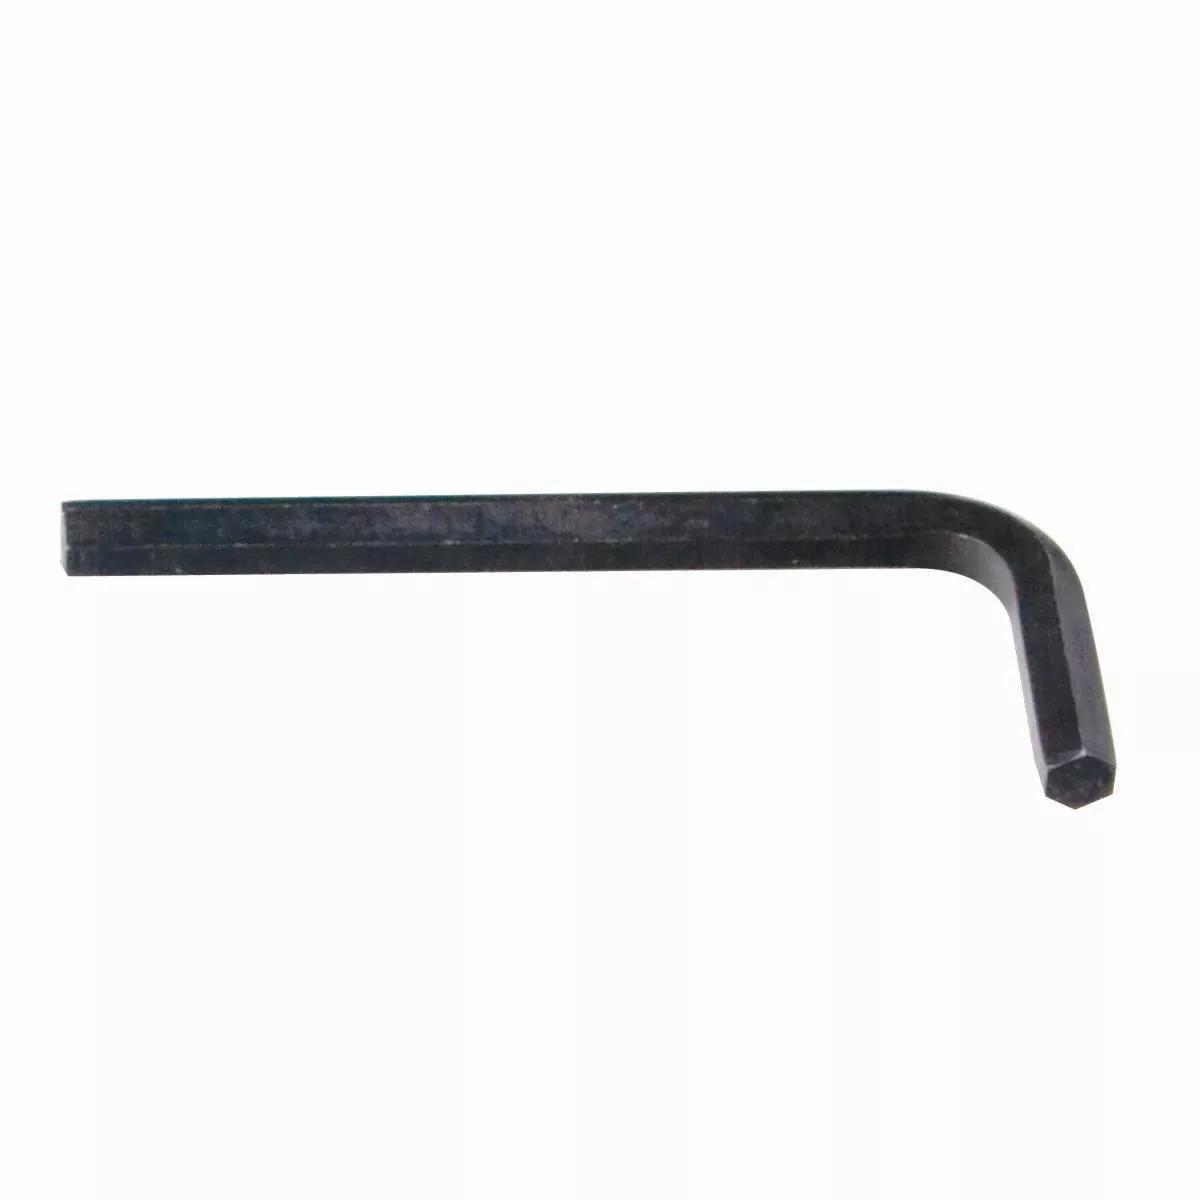 5/8" Short Arm Hex Key Wrench